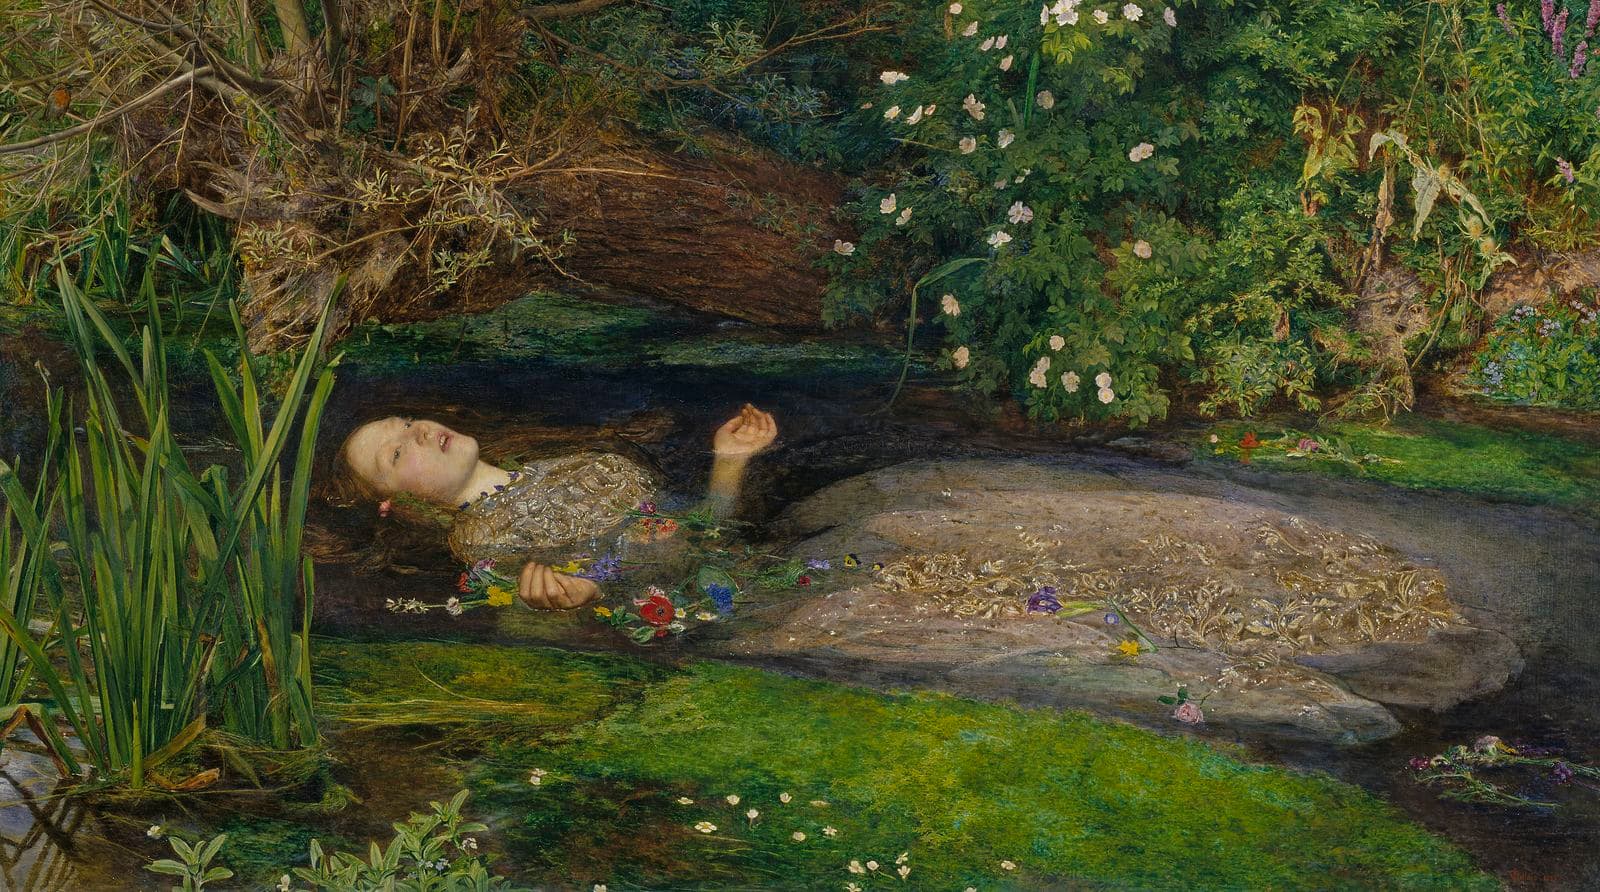 a young woman in a bejewelled dress floats face up in a stream surrounded by greenery and flowers